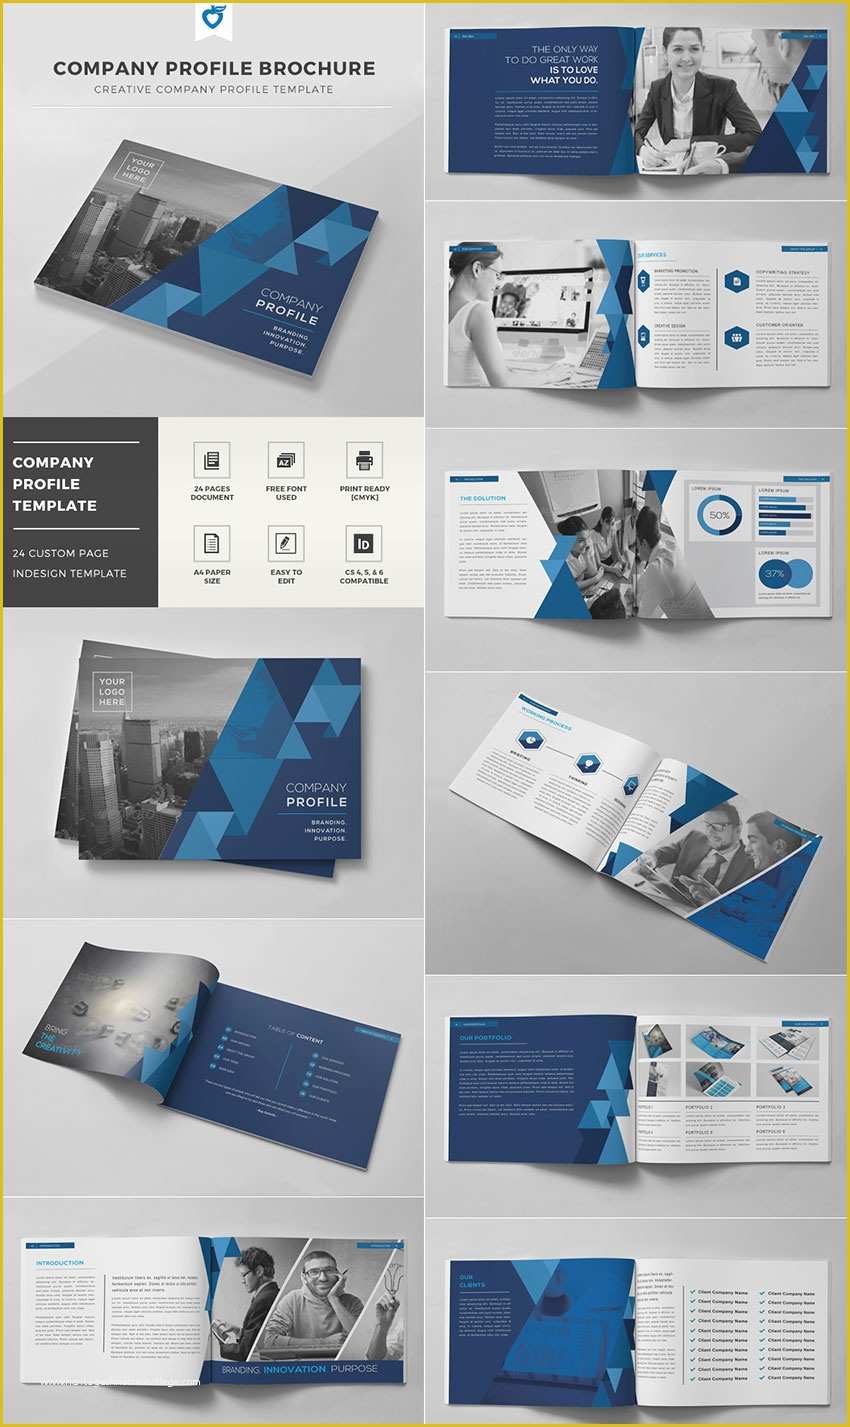 Free Security Company Profile Template Of 20 Best Indesign Brochure Templates for Creative